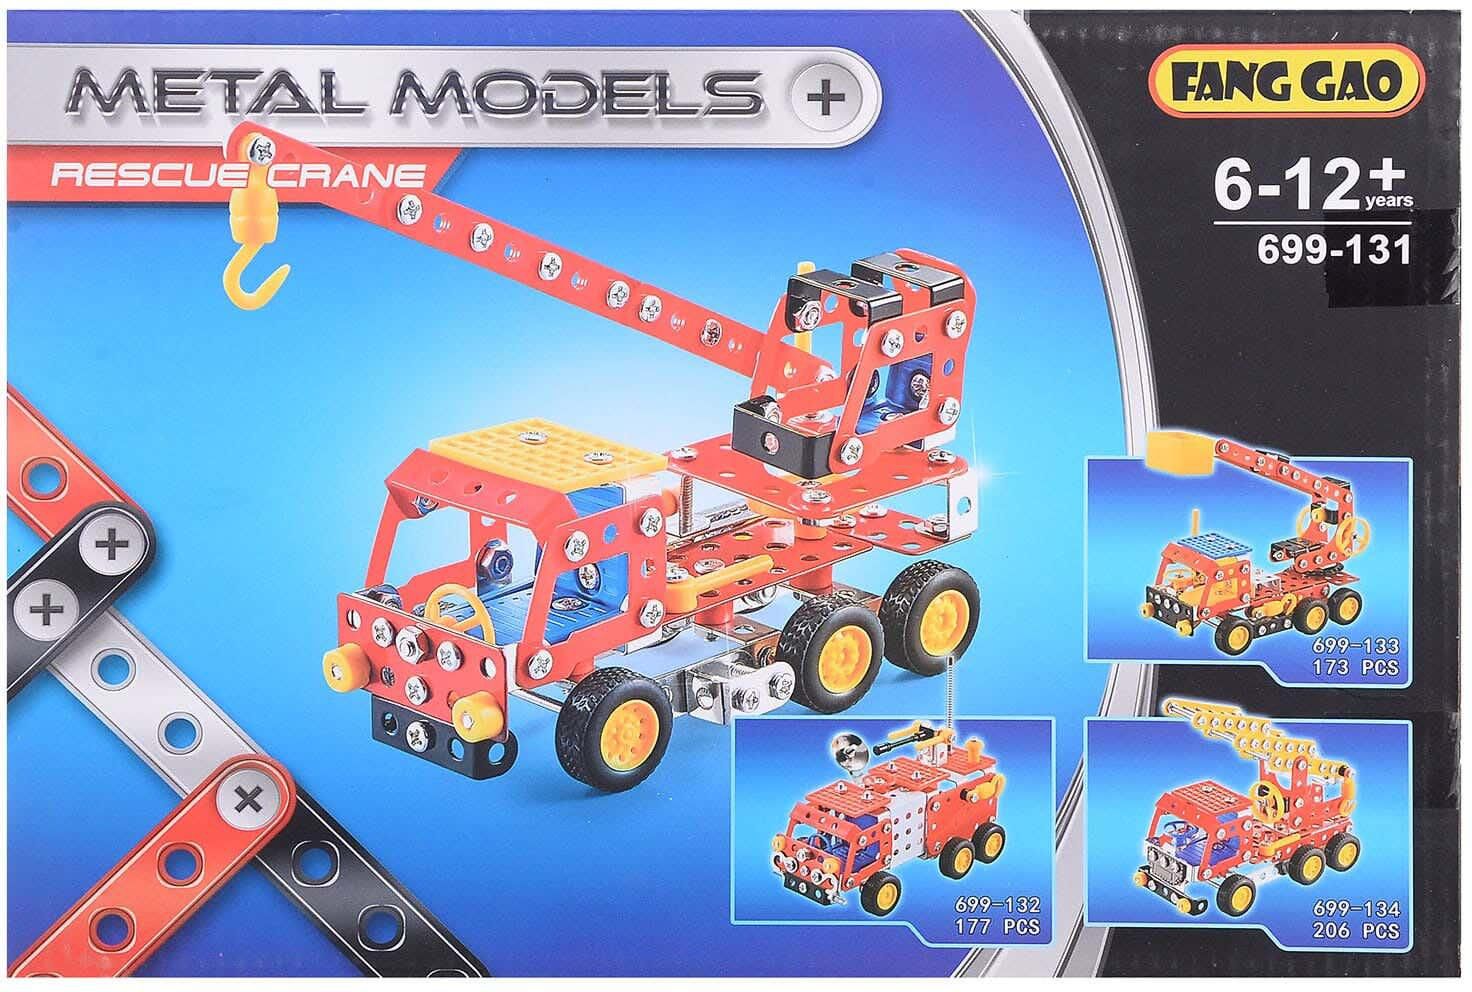 Get Meccano Metal Toy Assembling A Fire Winch, 181 Pieces - Multicolor with best offers | Raneen.com